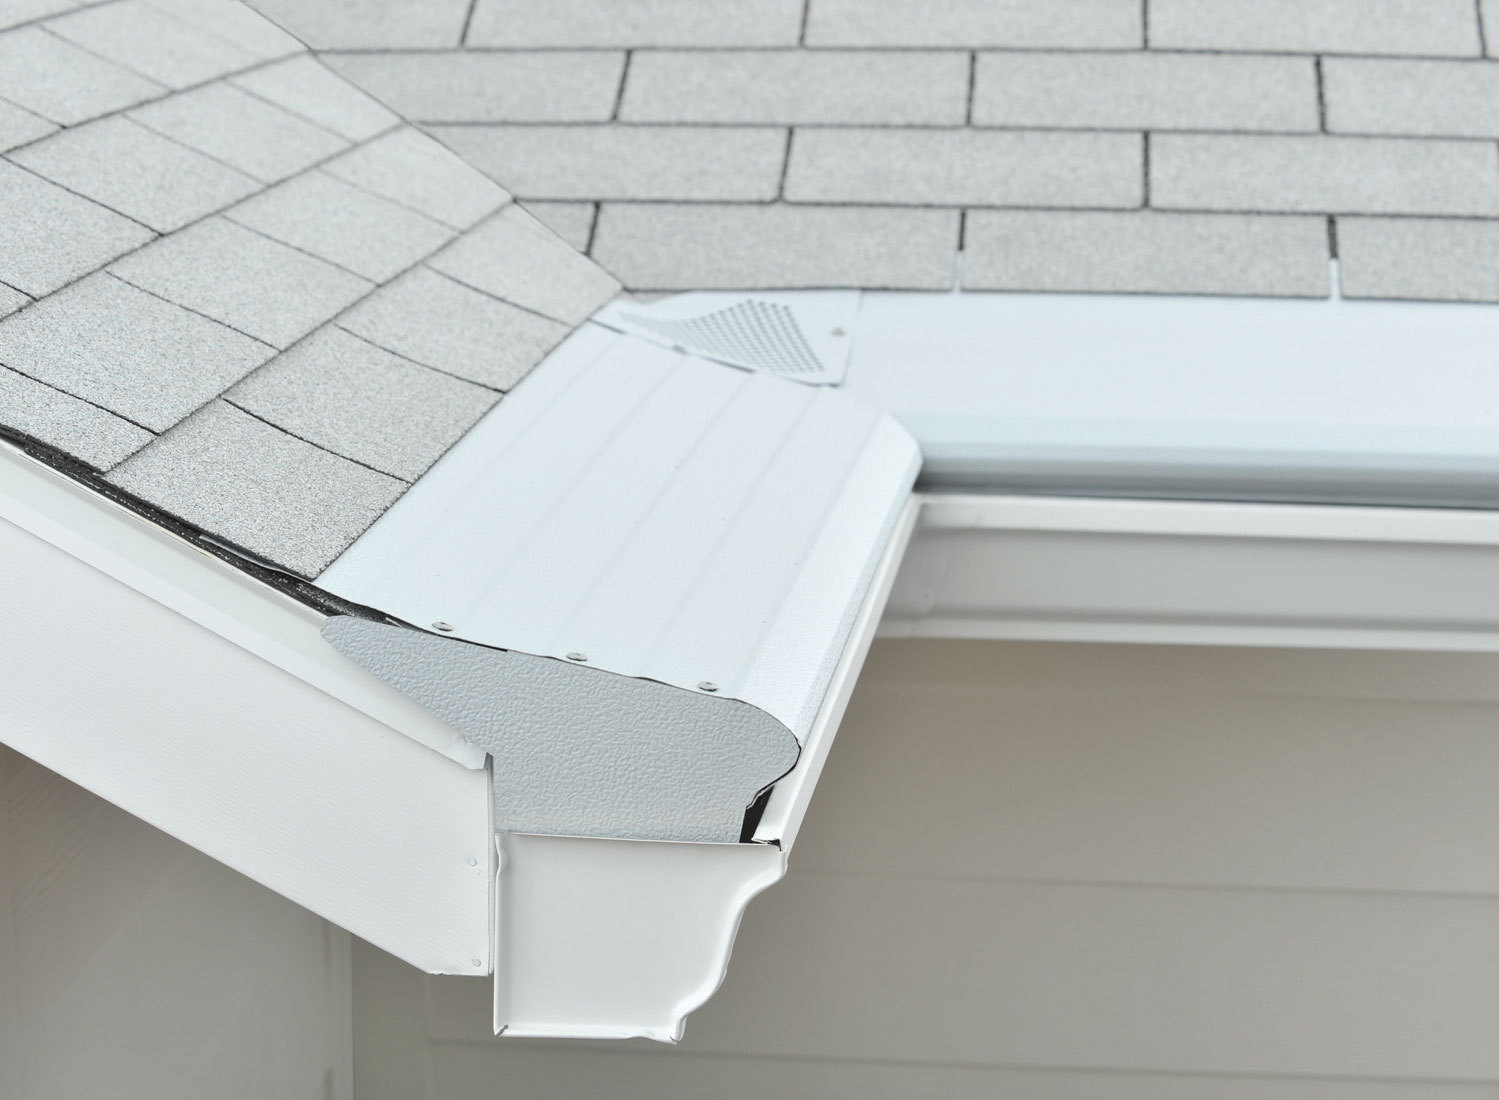 Gutter guards? Think again.